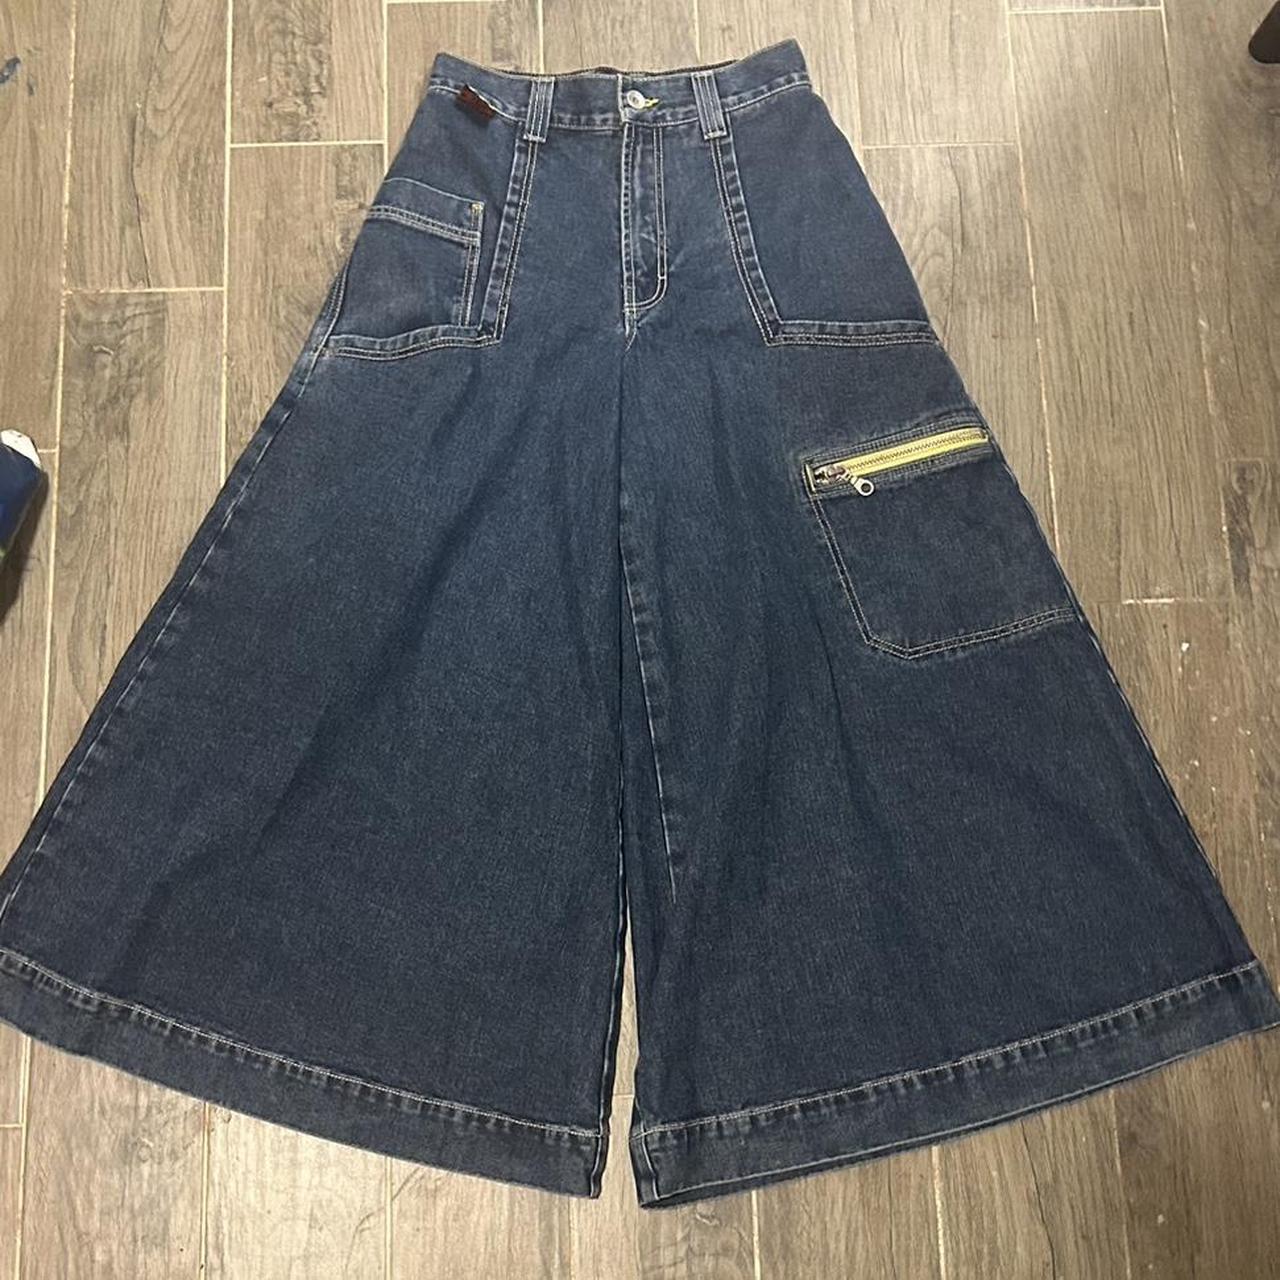 CRIME SCENE JNCOS. brand new!! the jeans r sexy... - Depop